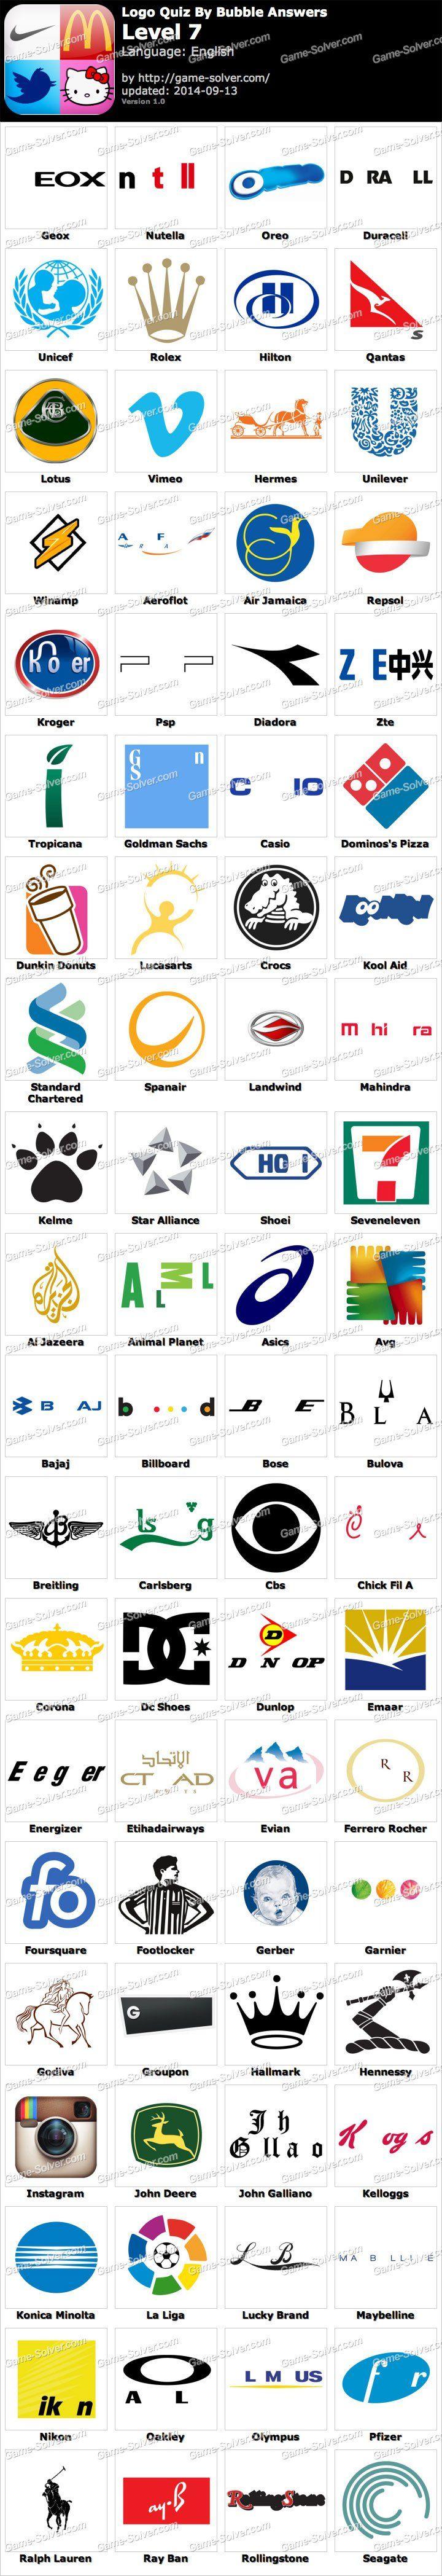 American Shoe Company Logo - Logo Quiz By Bubble Answers Level 7. I did not Know!!